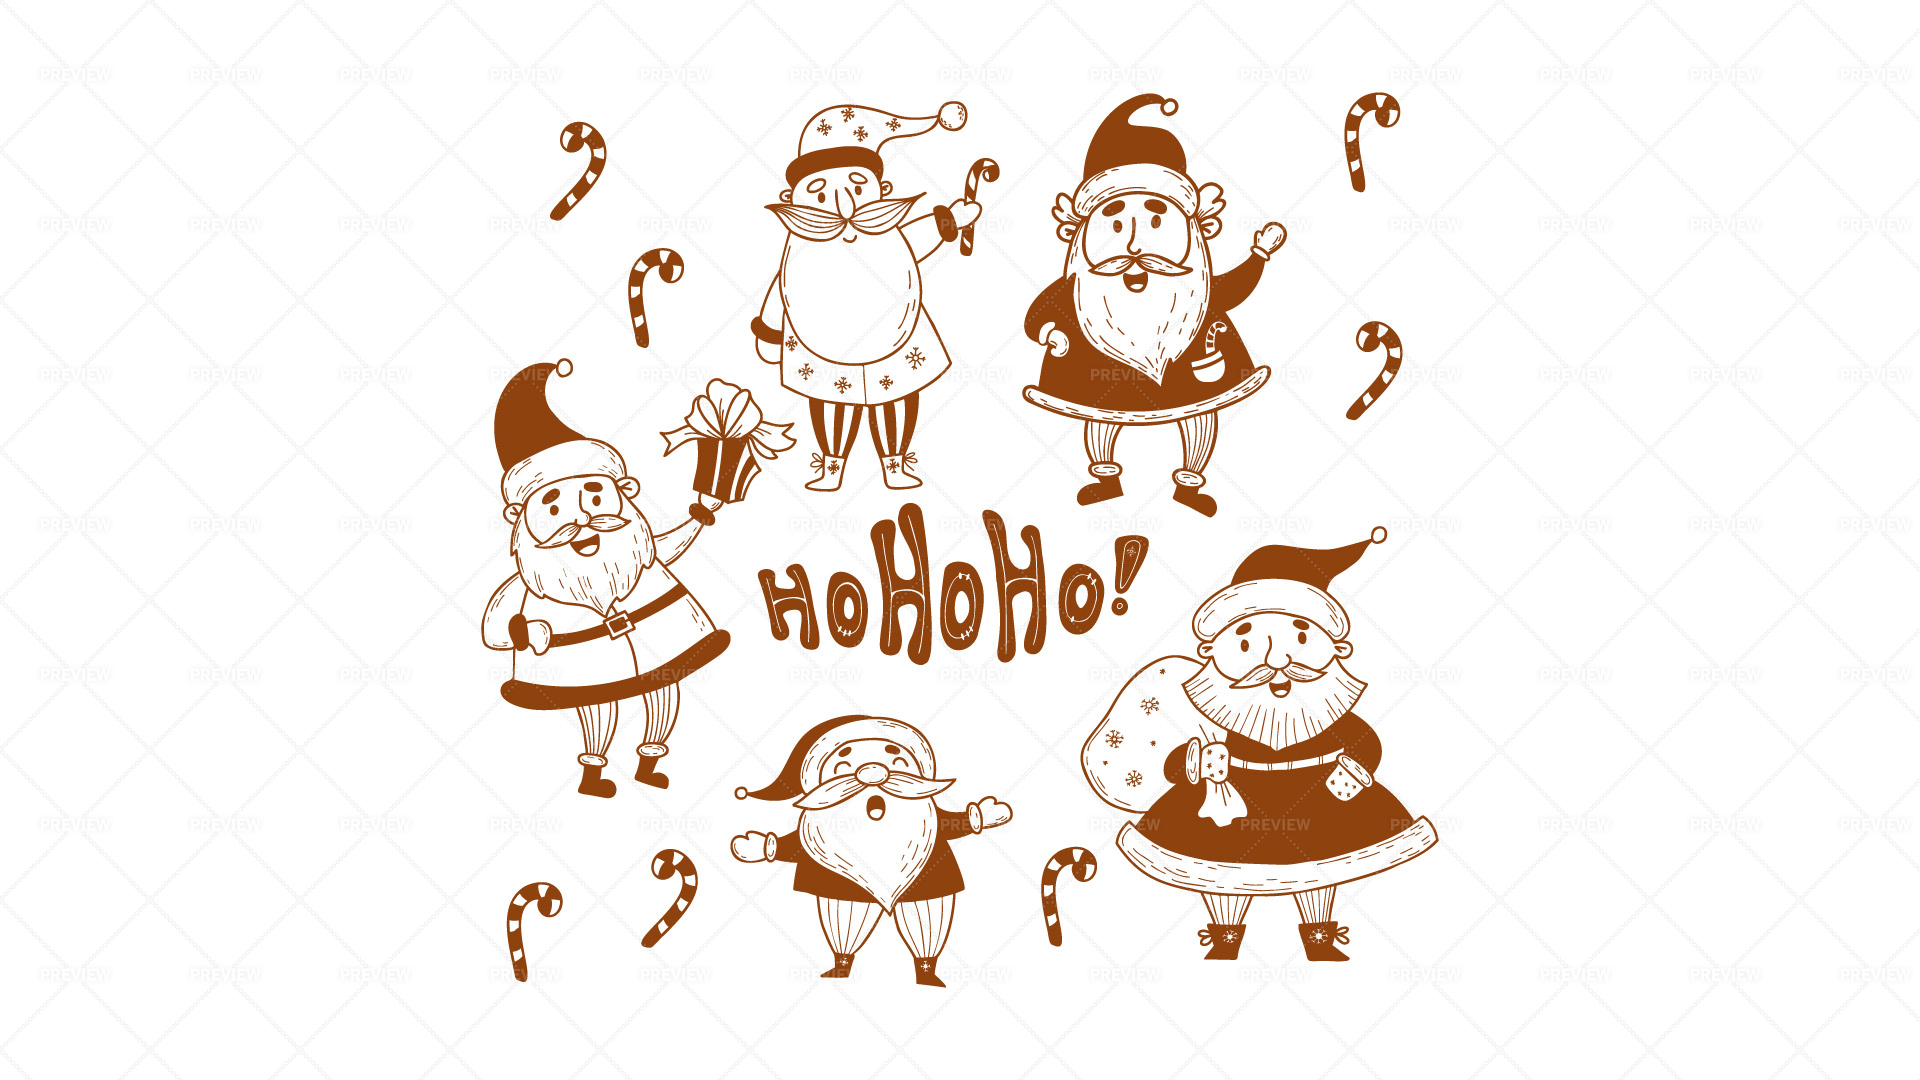 Merry christmas sketch design Royalty Free Vector Image